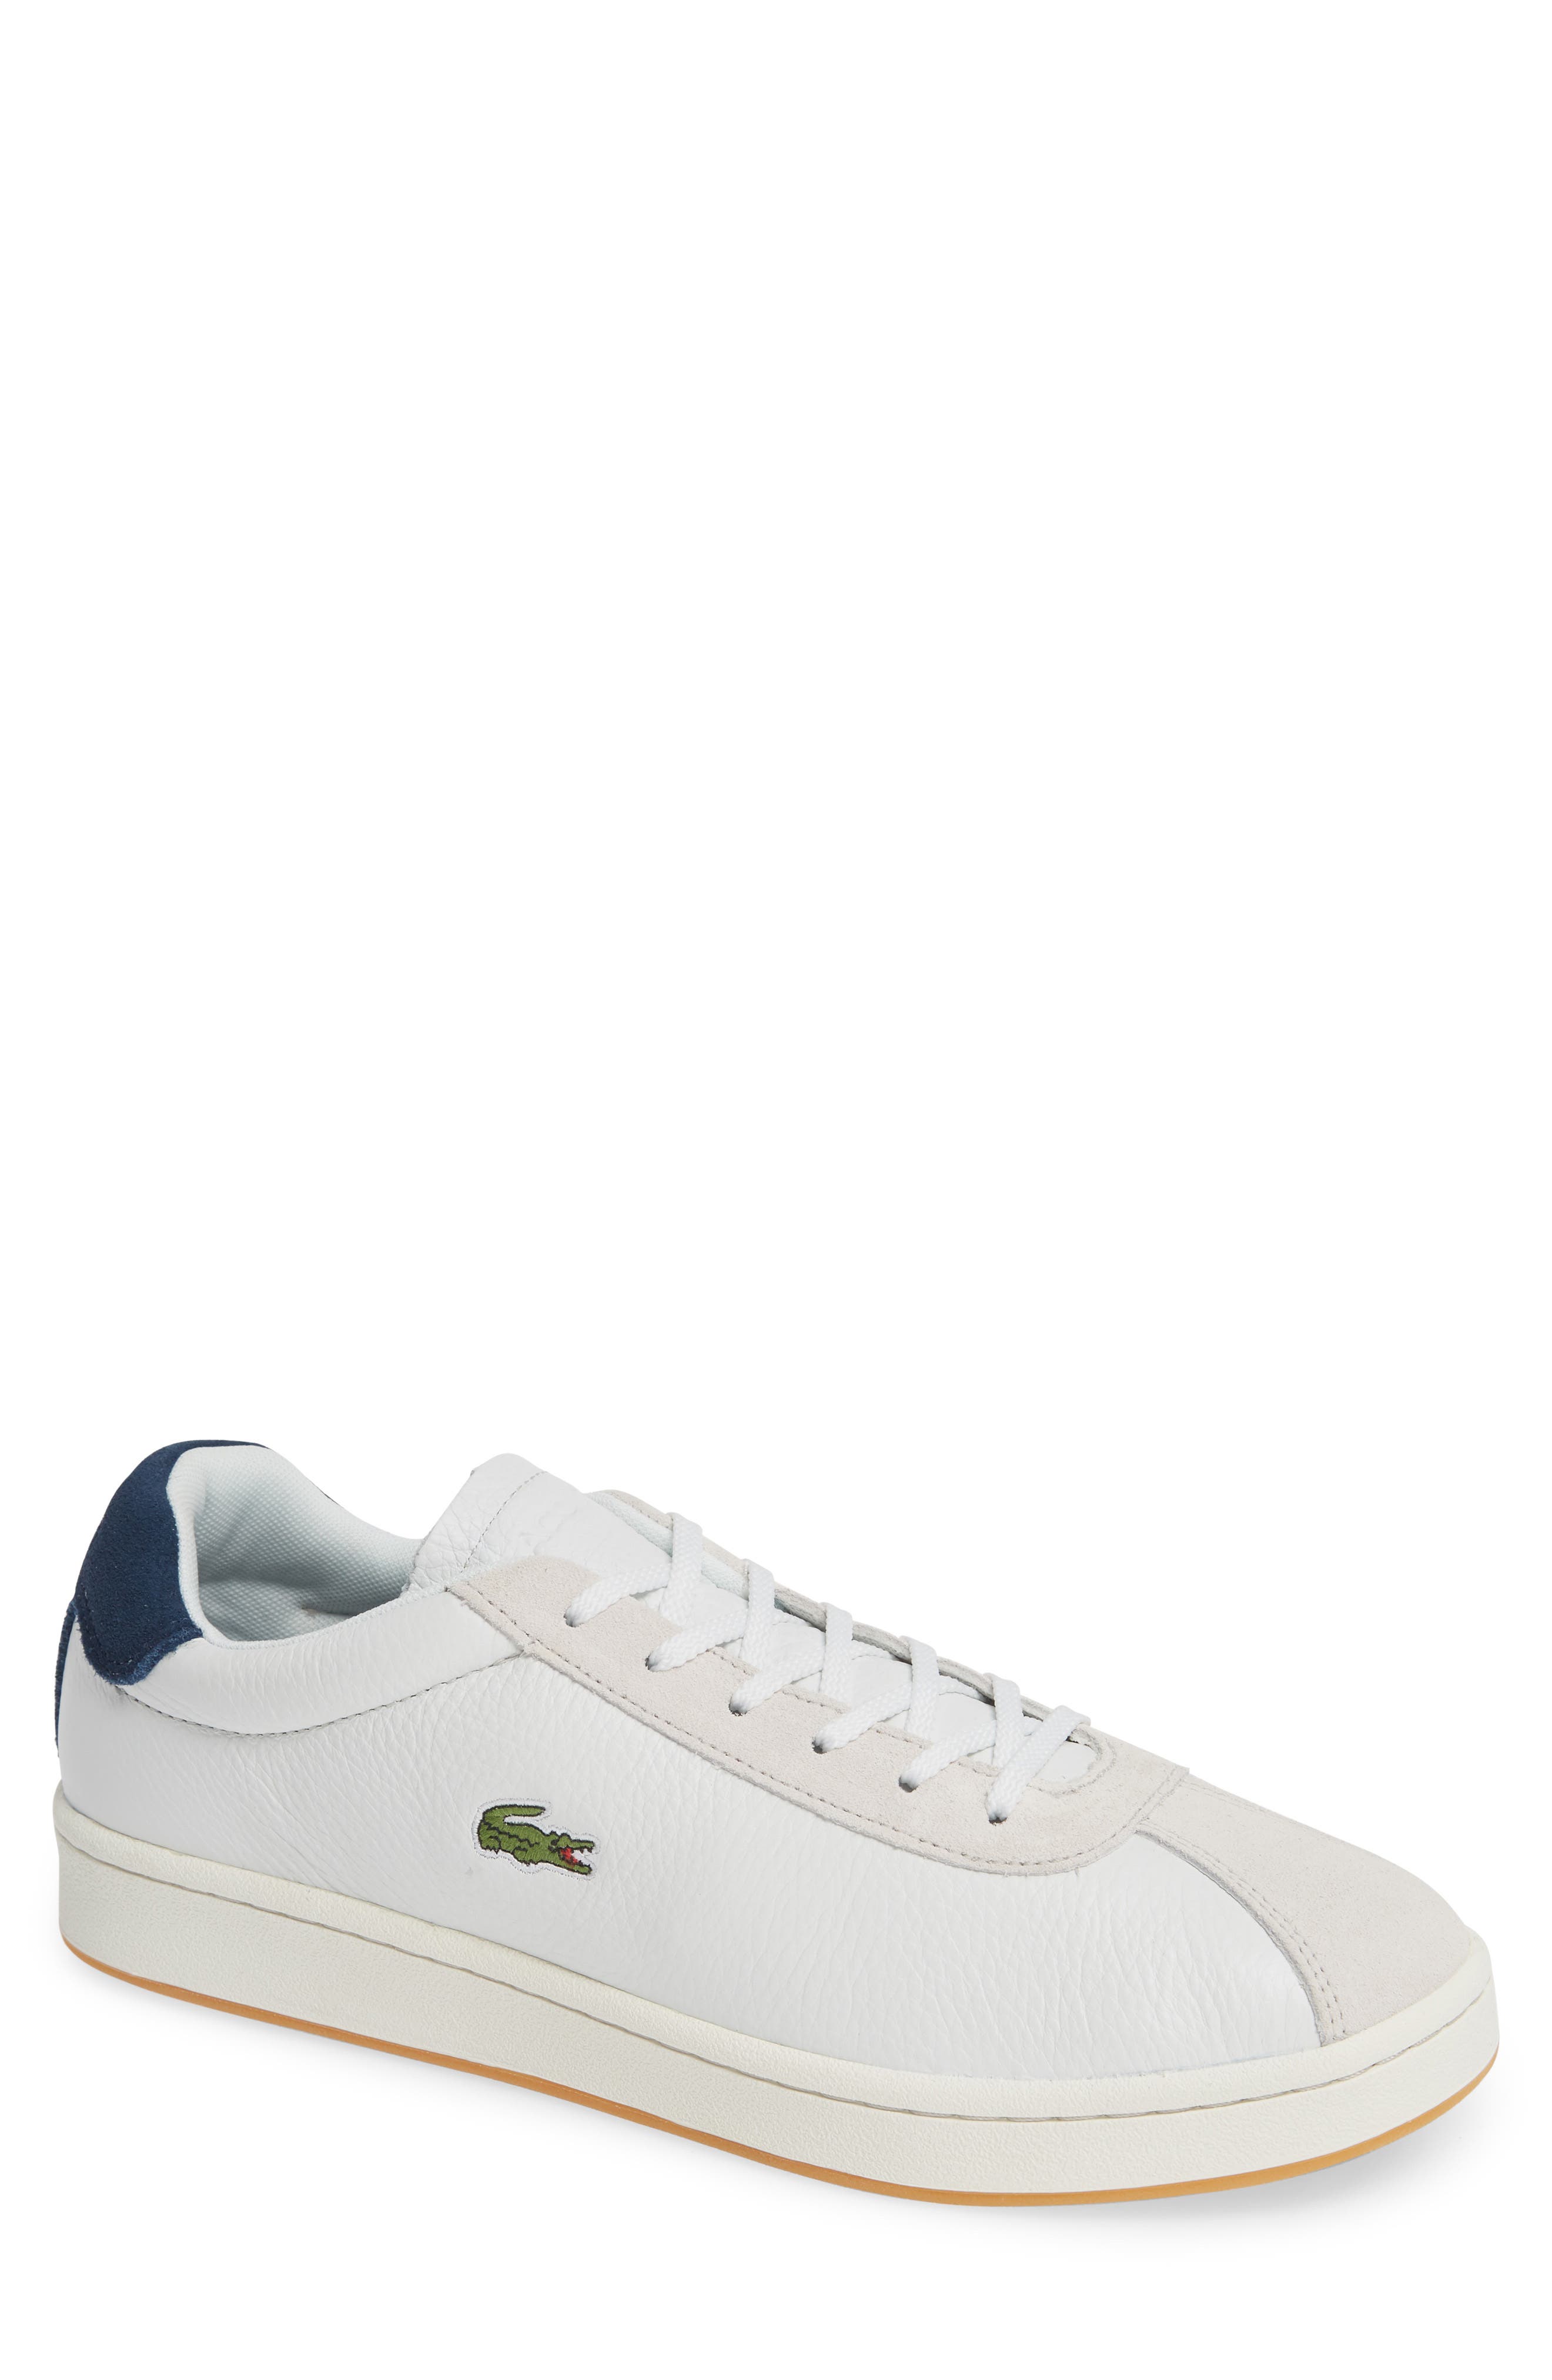 lacoste white and gold shoes